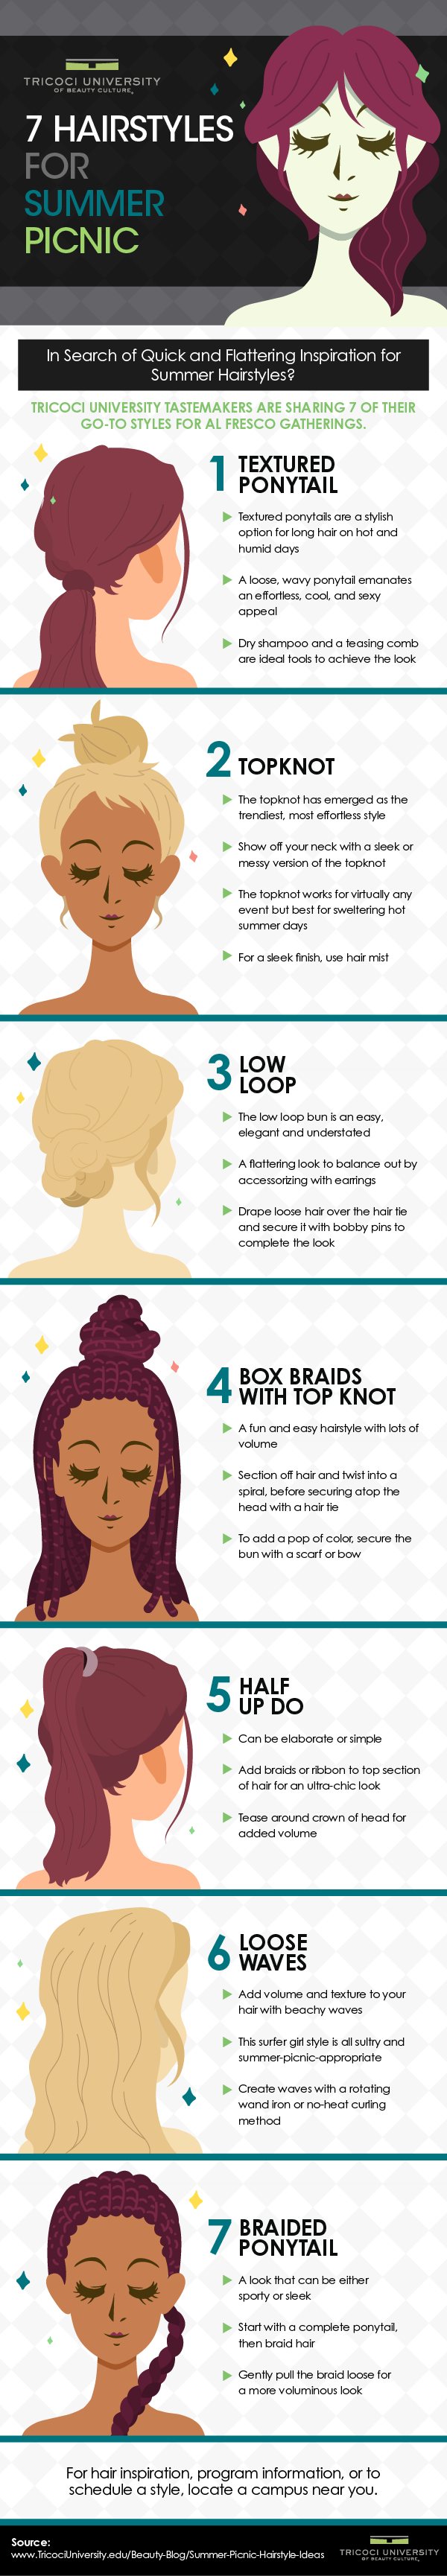 7 hairstyles for summer picnic